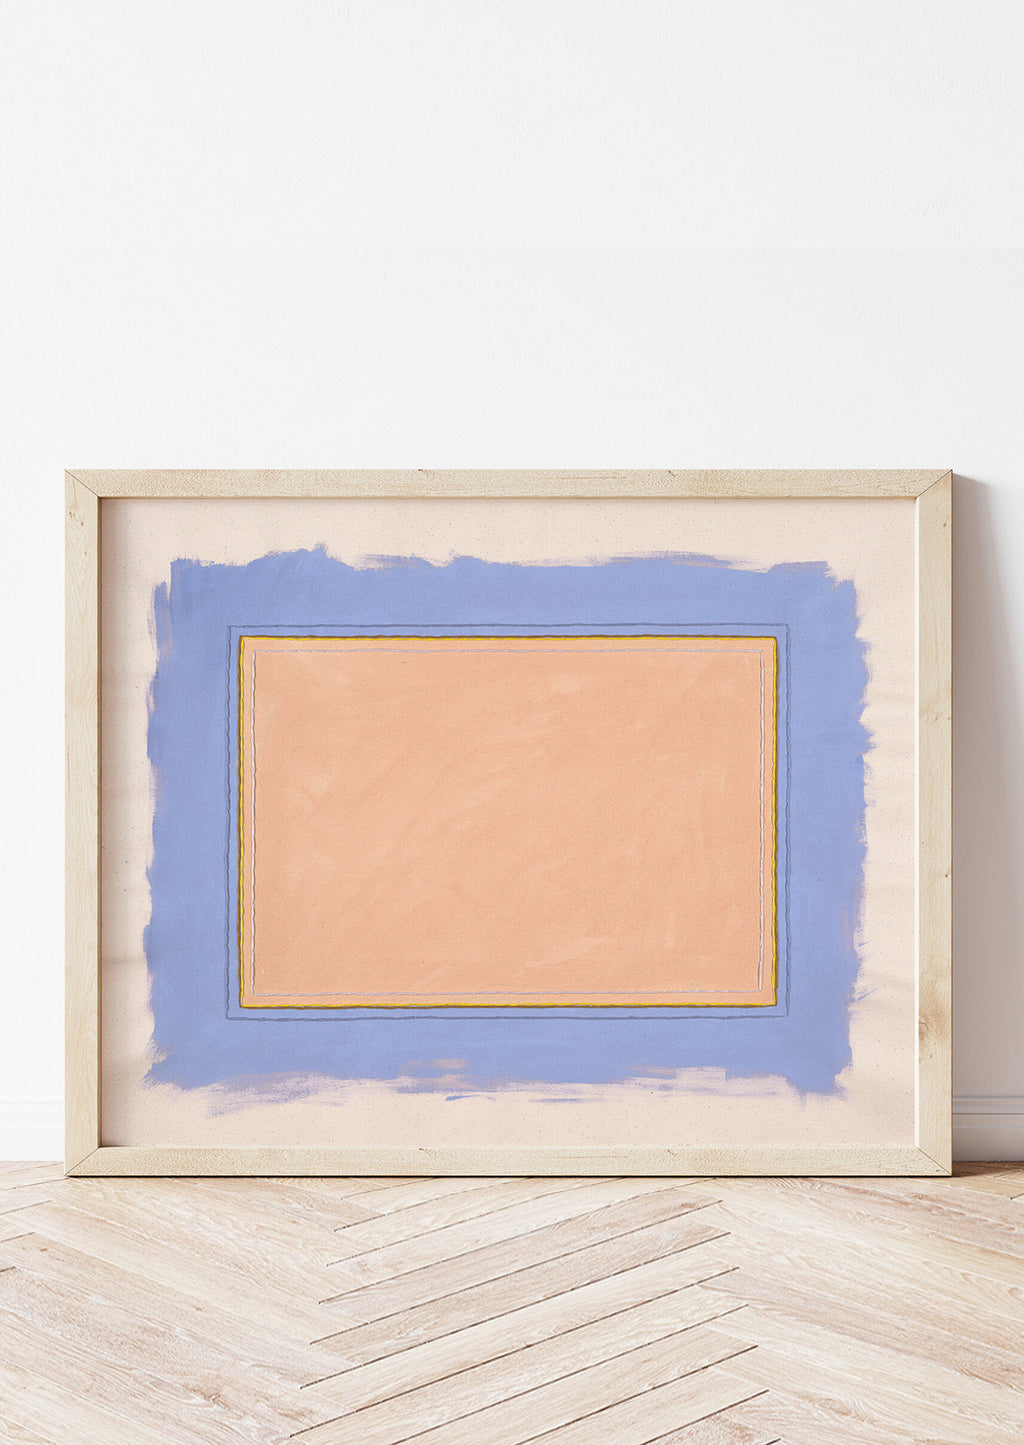 2: Digital reproduction of canvas painting featuring neon cornflower and peach painted rectangles with embroidery detail, shown in a wooden frame.